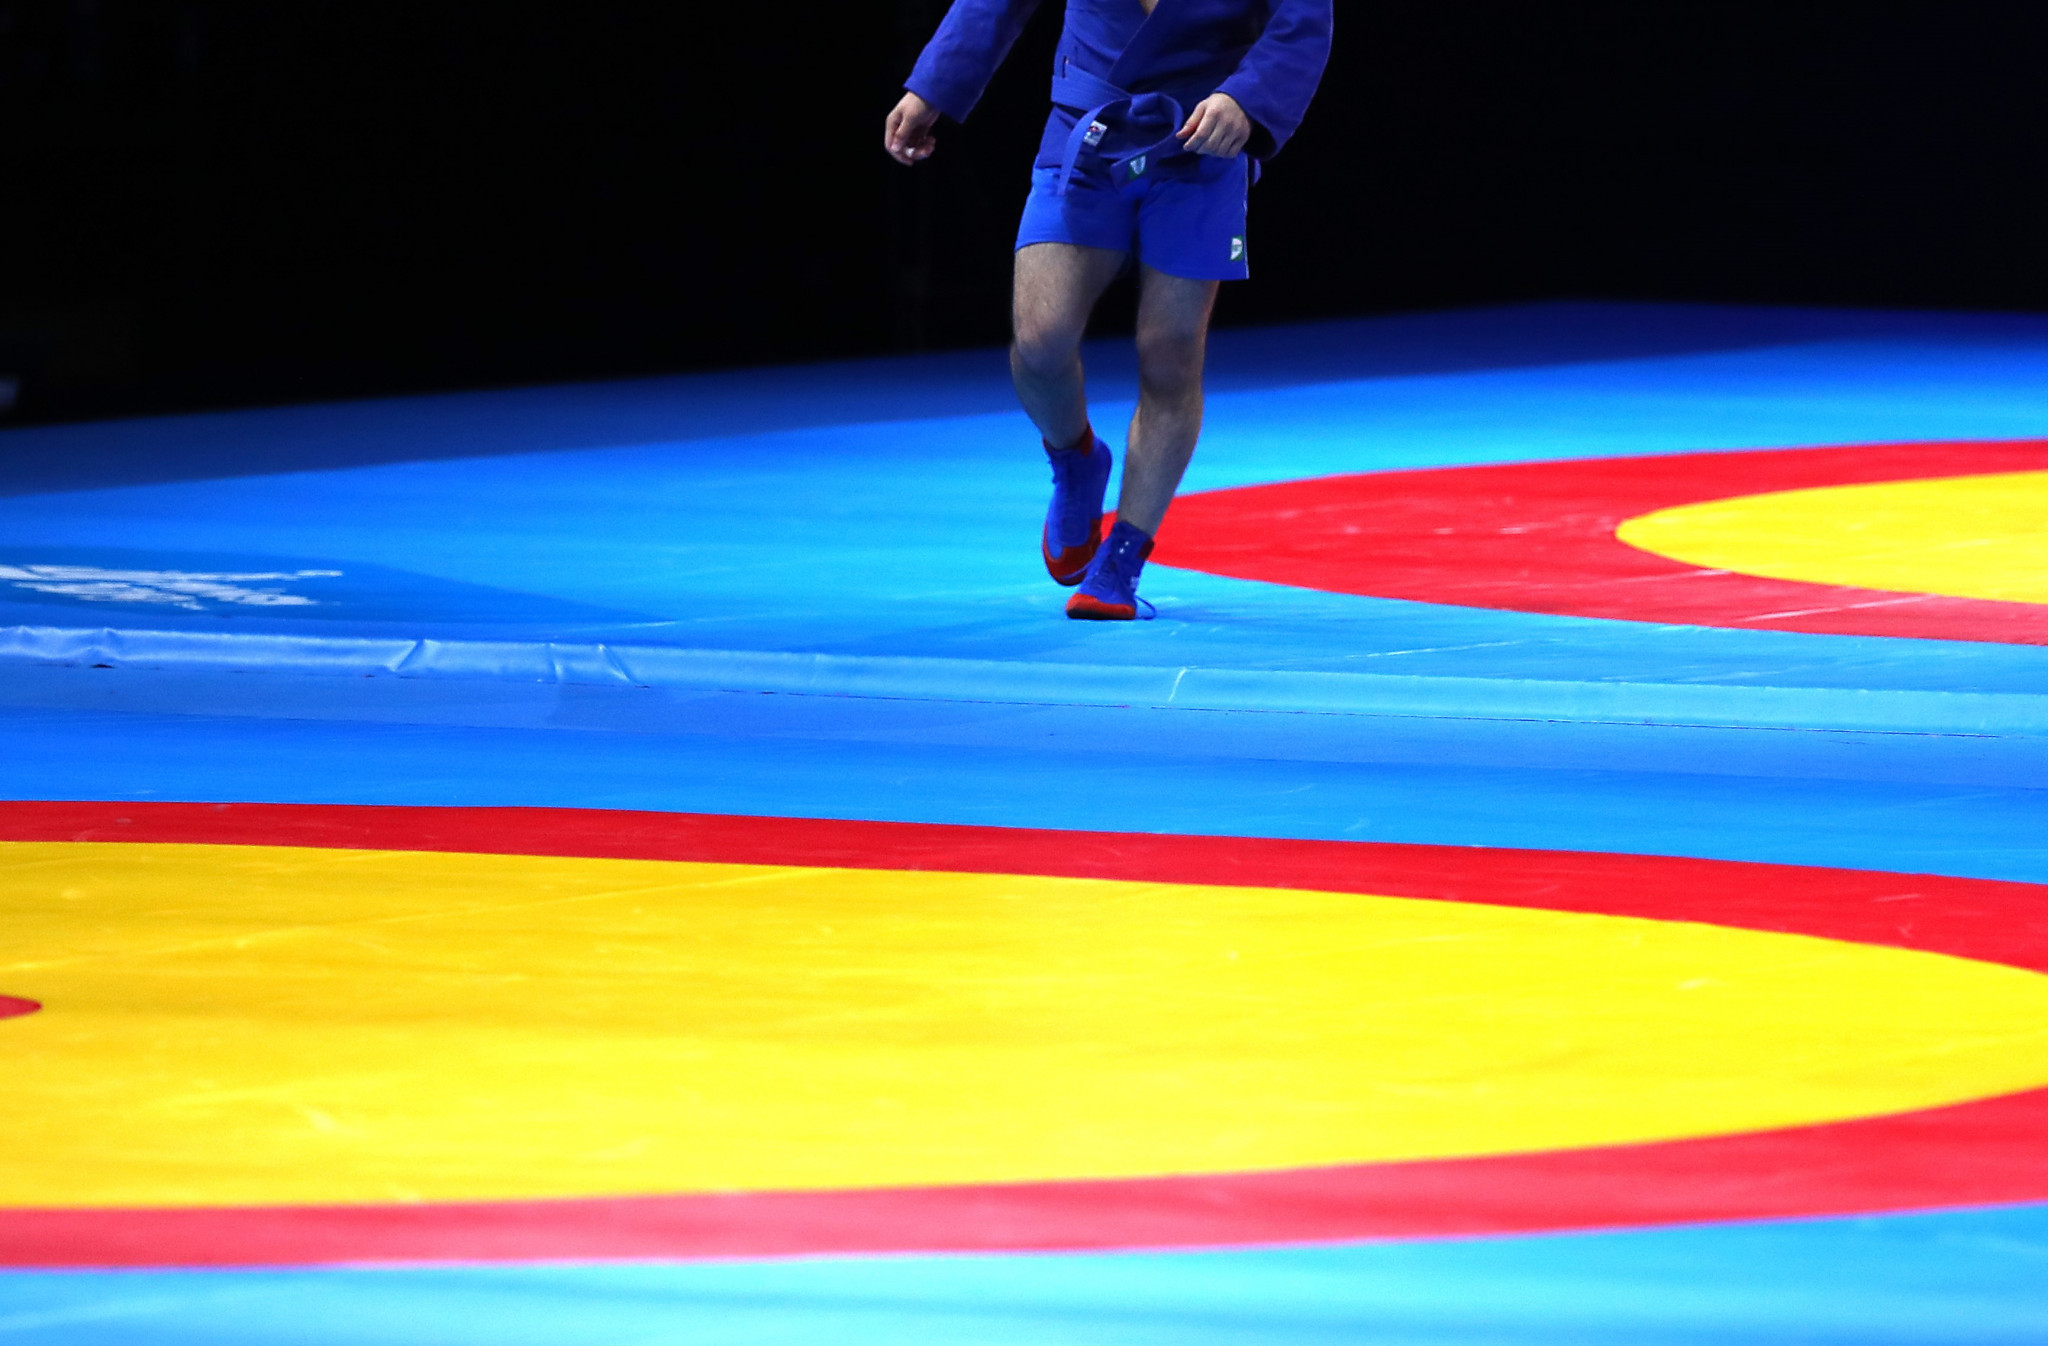 European Sambo Cup in Bucharest postponed over COVID-19 concerns